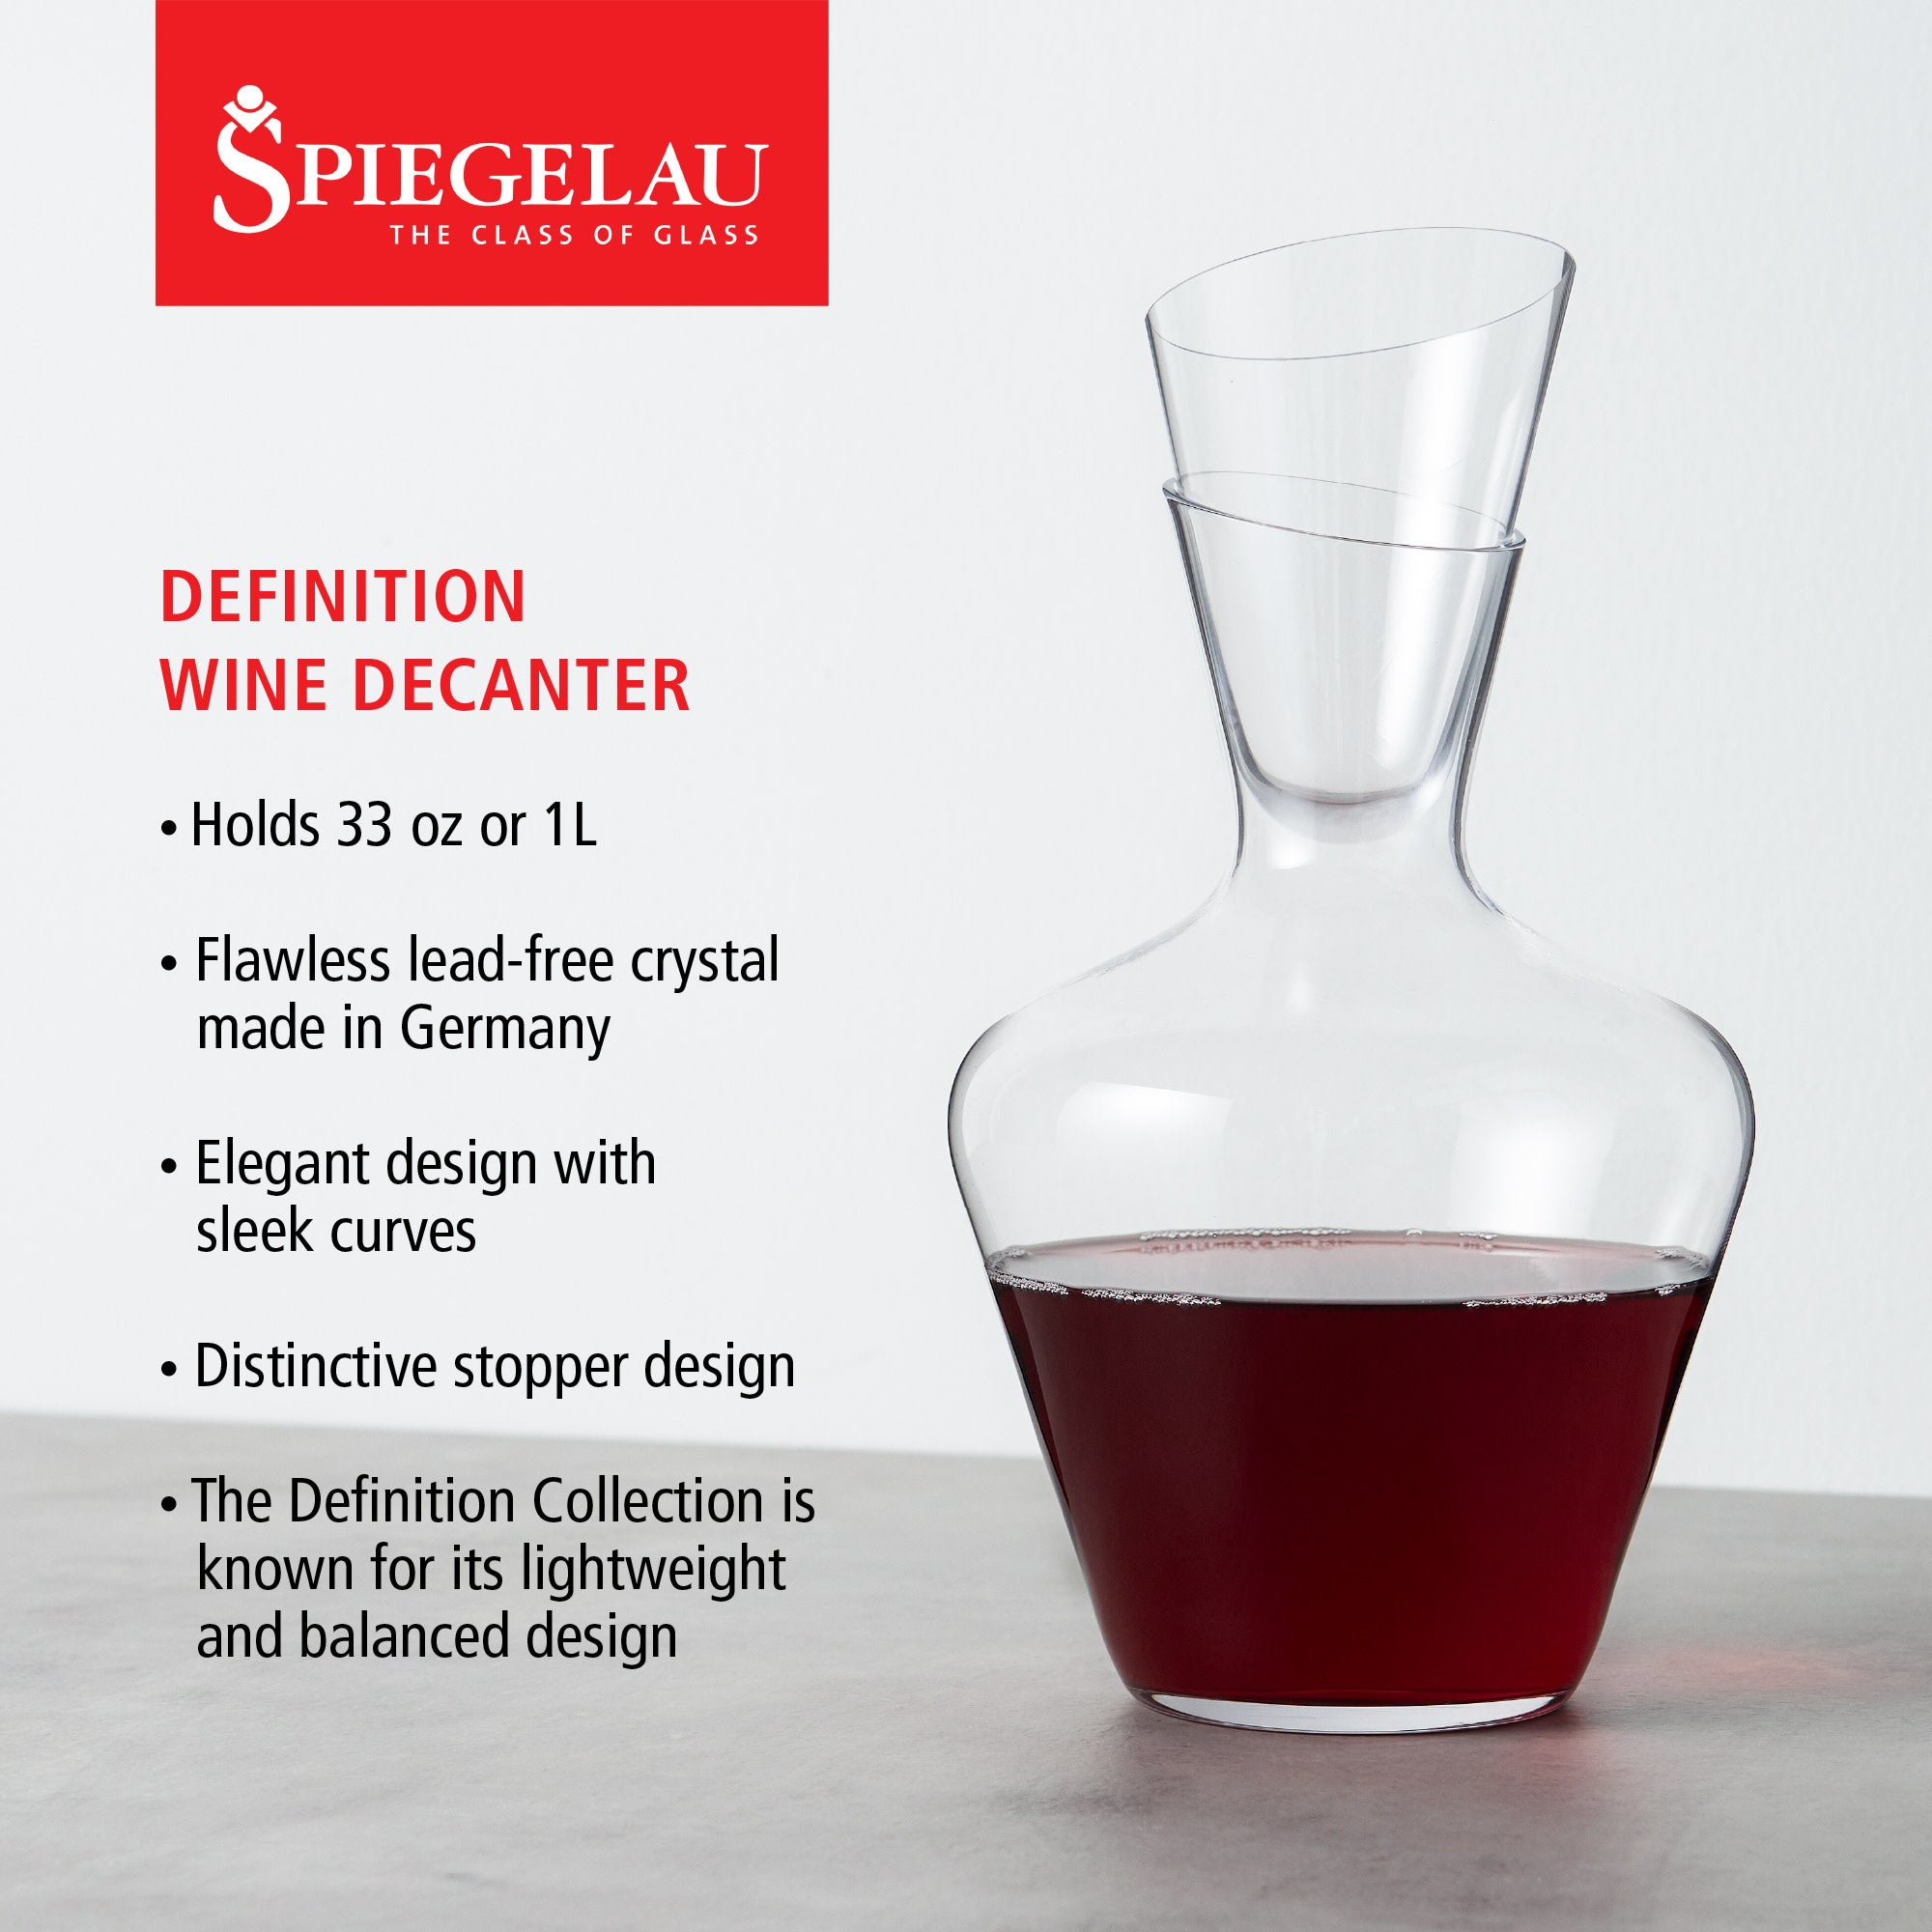 Spiegelau Definition 1L Wine Decanter and Stopper, set of 1 (1350157)